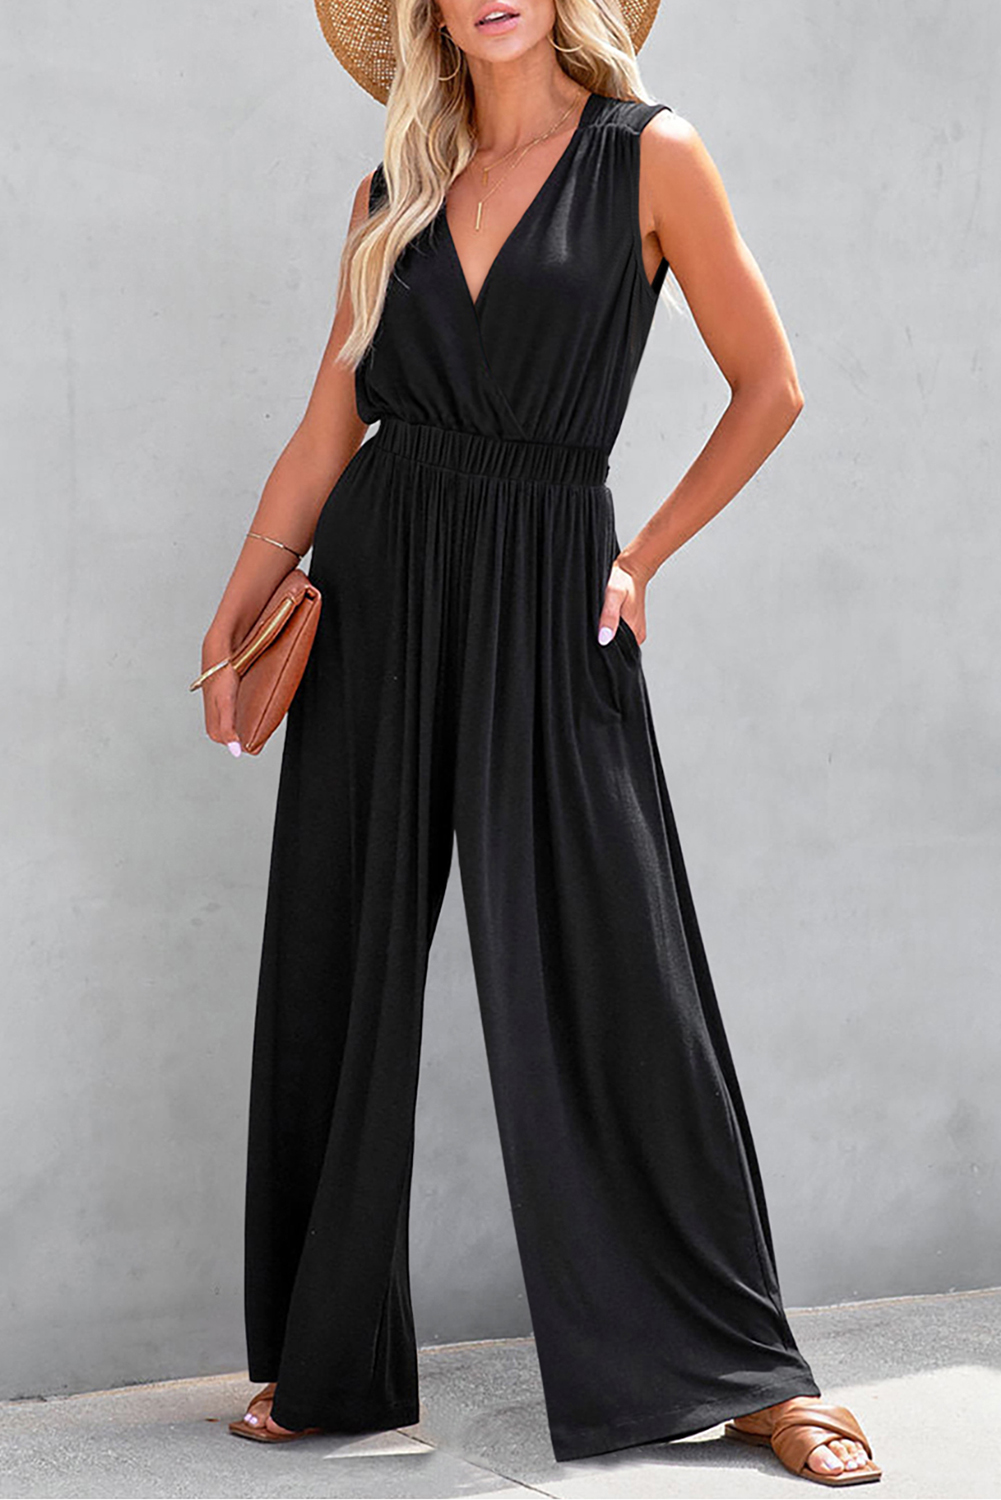 Shewin Wholesale CLOTHING Black Deep V Pocketed Pleated Wide Leg Jumpsuit